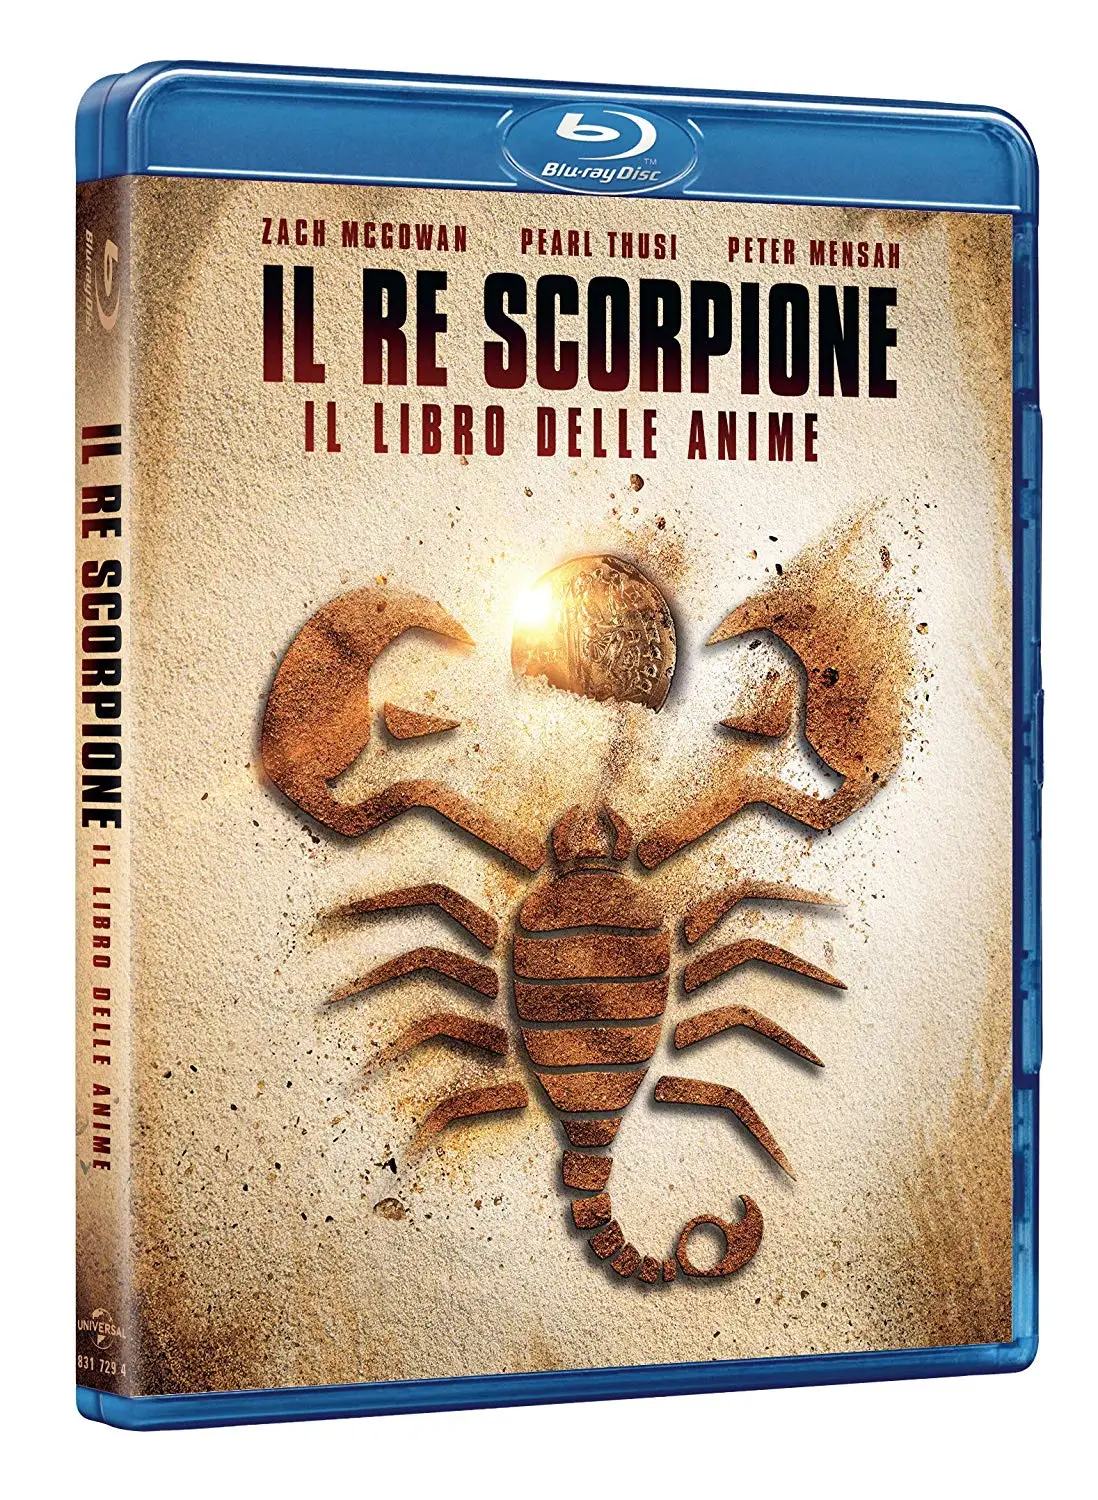 2018 The Scorpion King: Book Of Souls